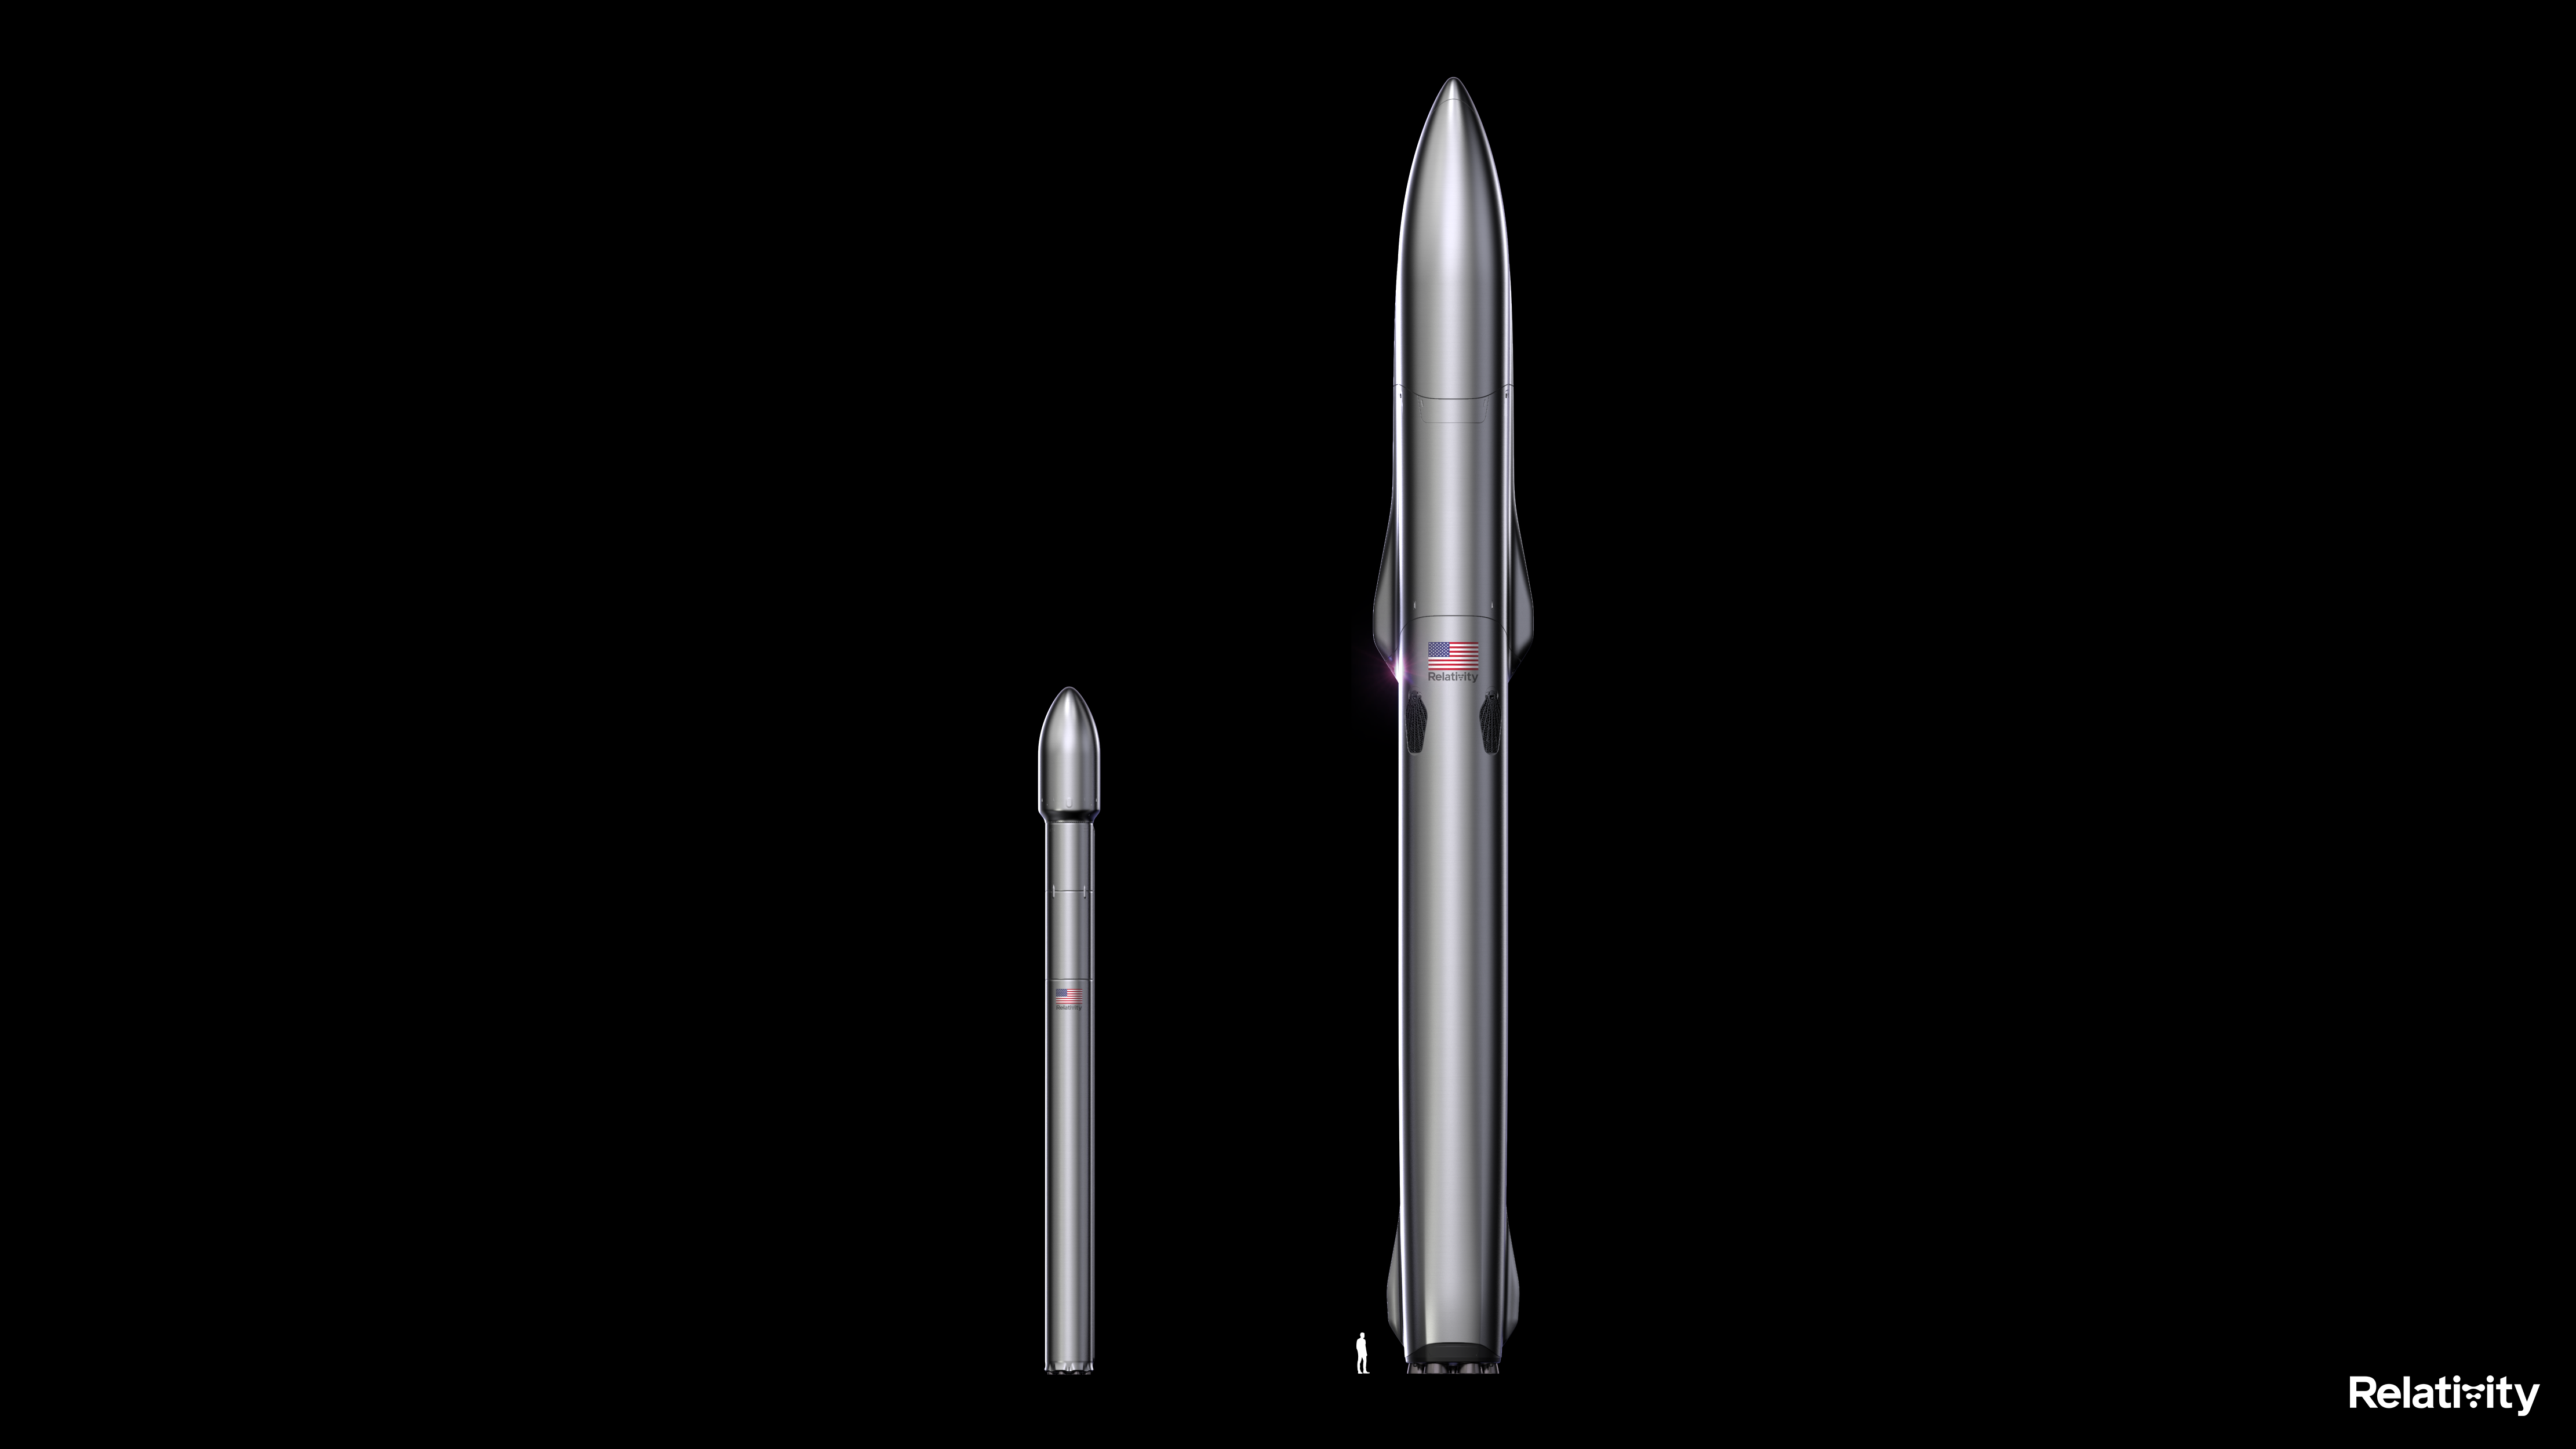 Relativity Space's fully 3D printed rockets, the Terran 1 and the larger and reusable Terran R